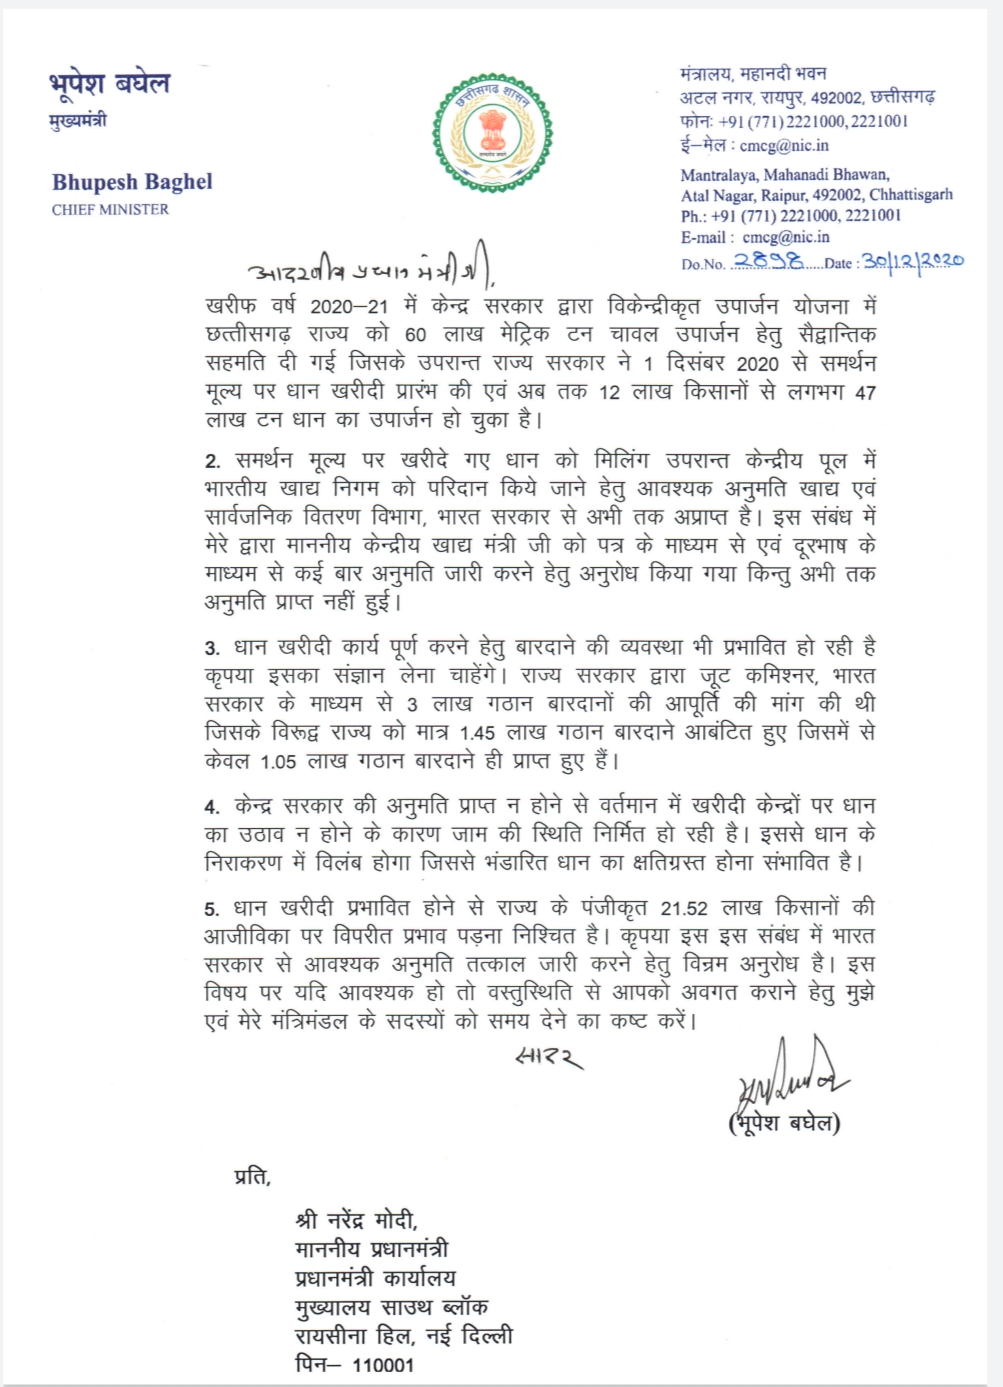 CM Bhupesh wrote letter to PM